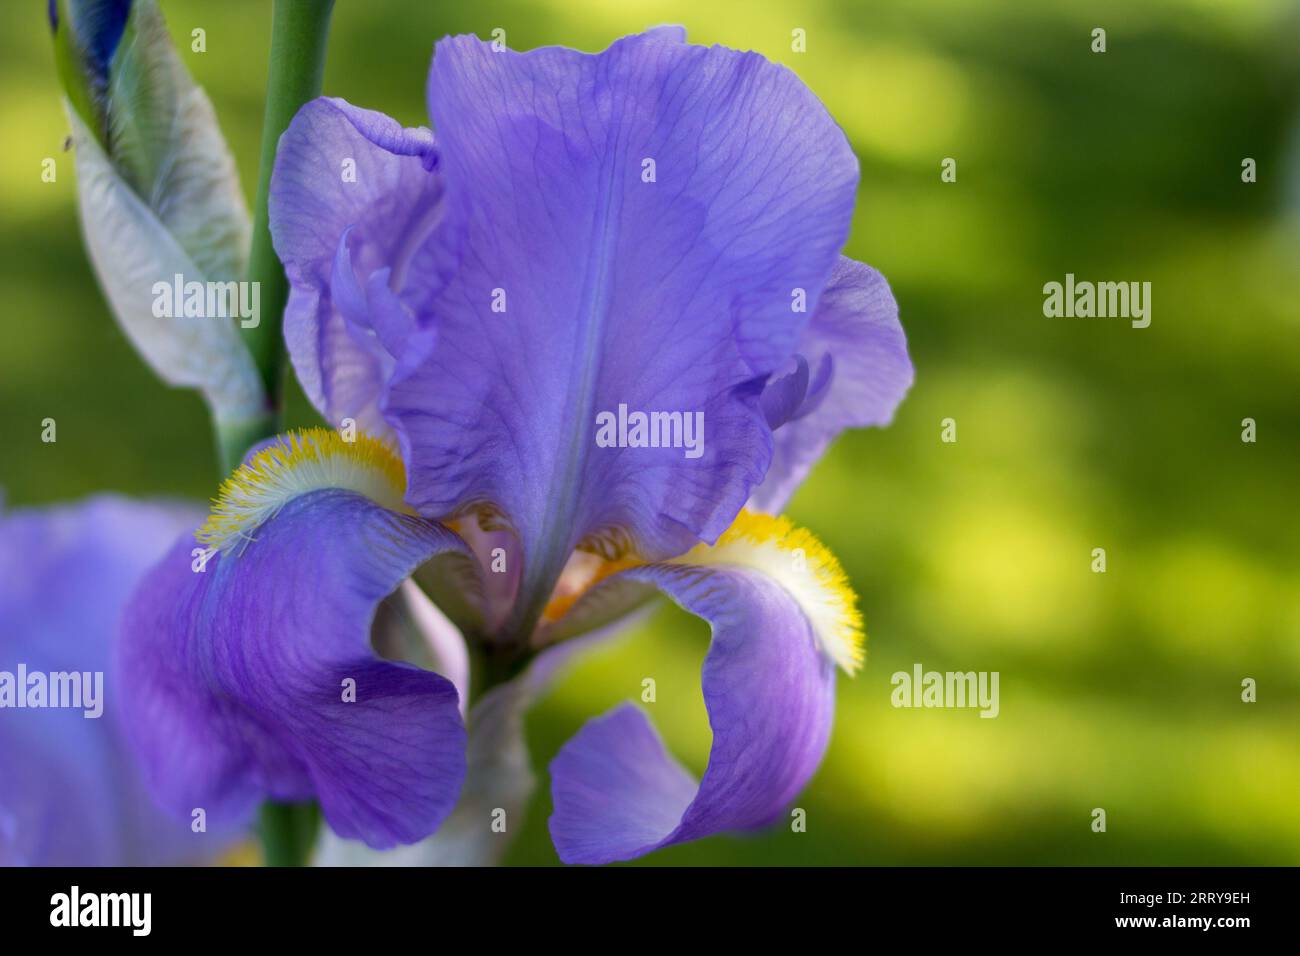 On a green background in the garden flower iris violet Stock Photo